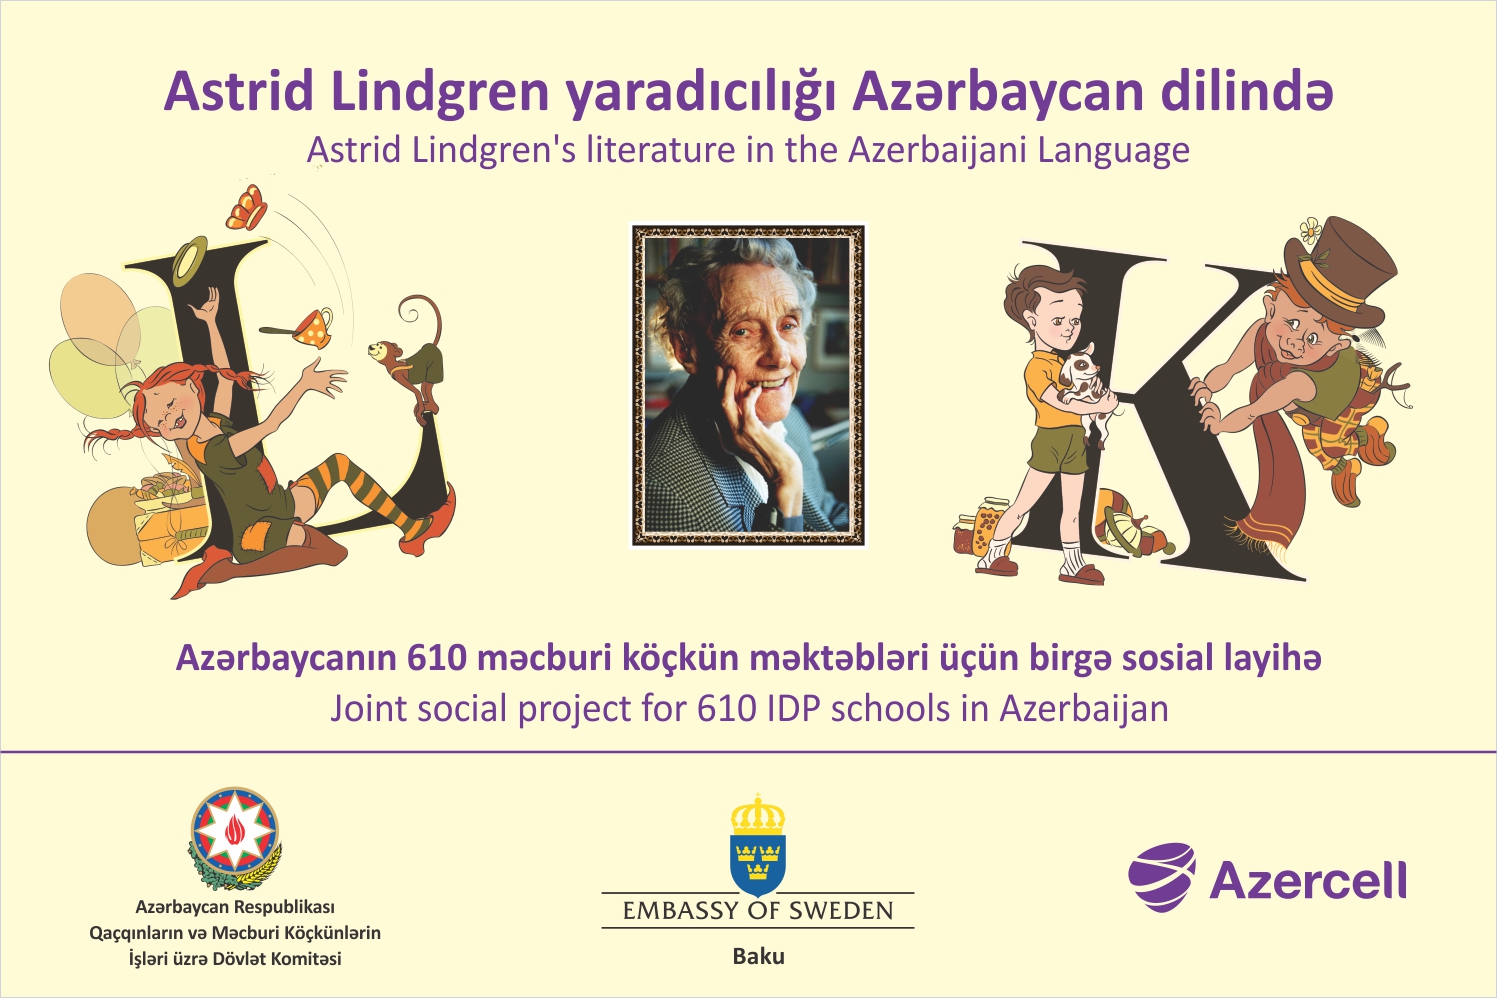 Books of famous children’s author translated to Azerbaijani